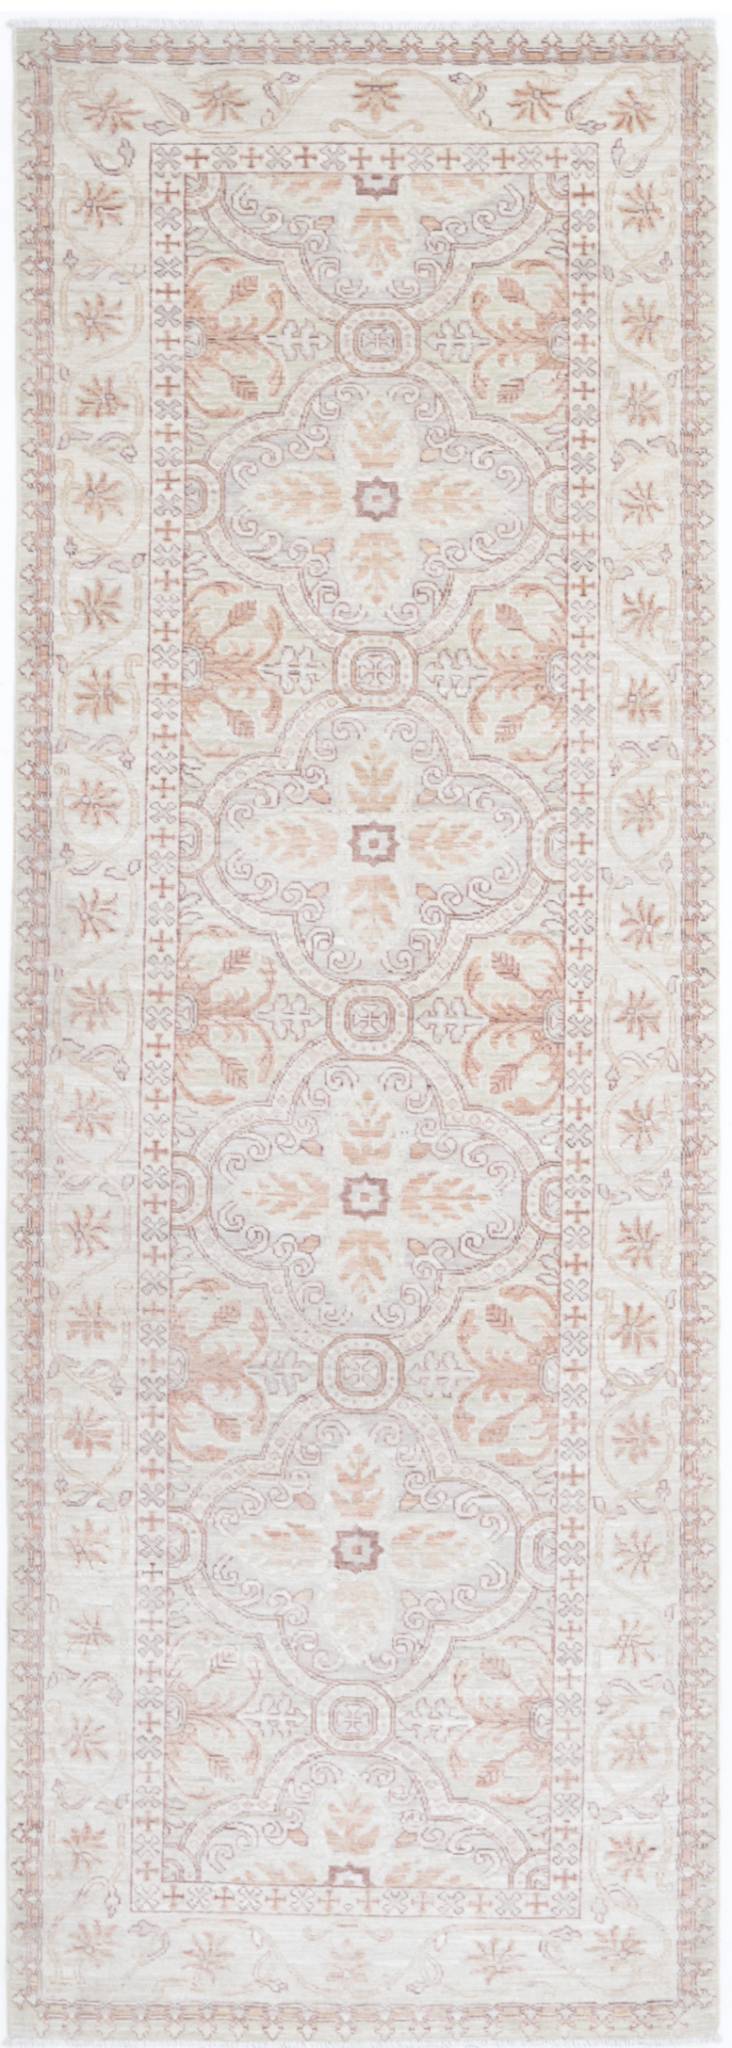 Traditional Hand Knotted Serenity Tabriz Wool Rug of Size 3'0'' X 9'2'' in Green and Taupe Colors - Made in Afghanistan